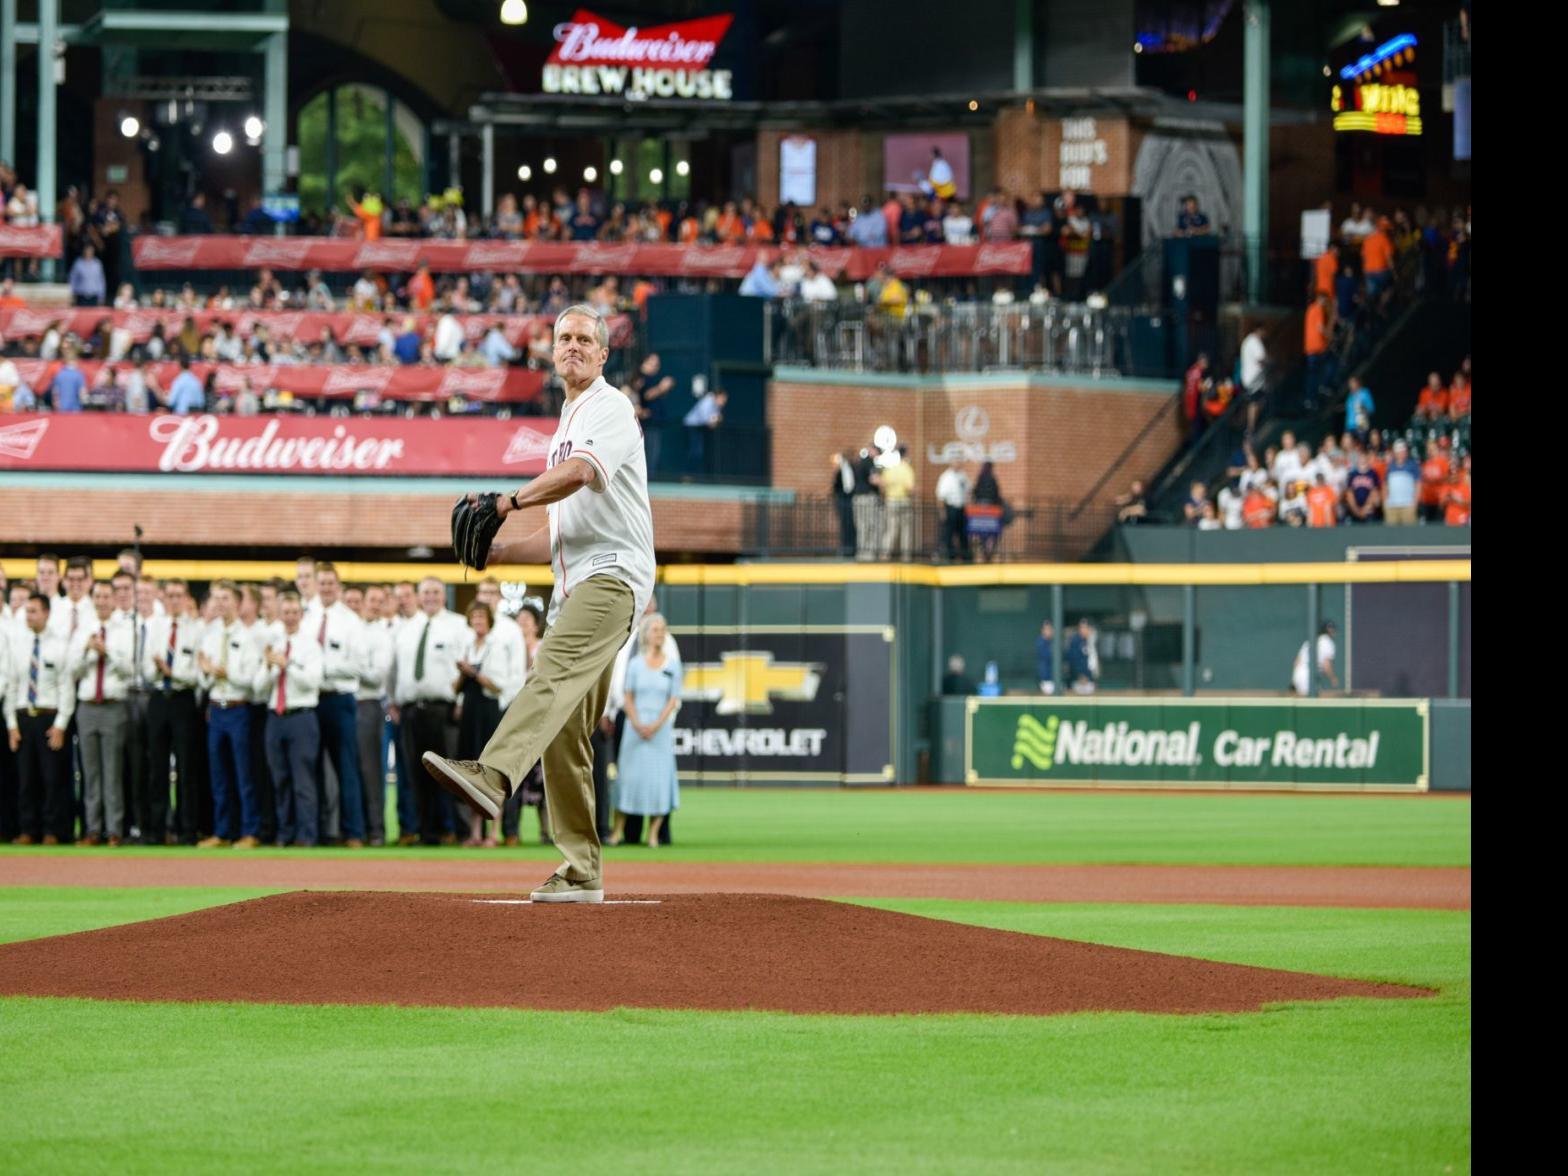 Elder Bednar throws first pitch to mission president, former MLB player  Jeremy Guthrie at Houston Astros game - Church News